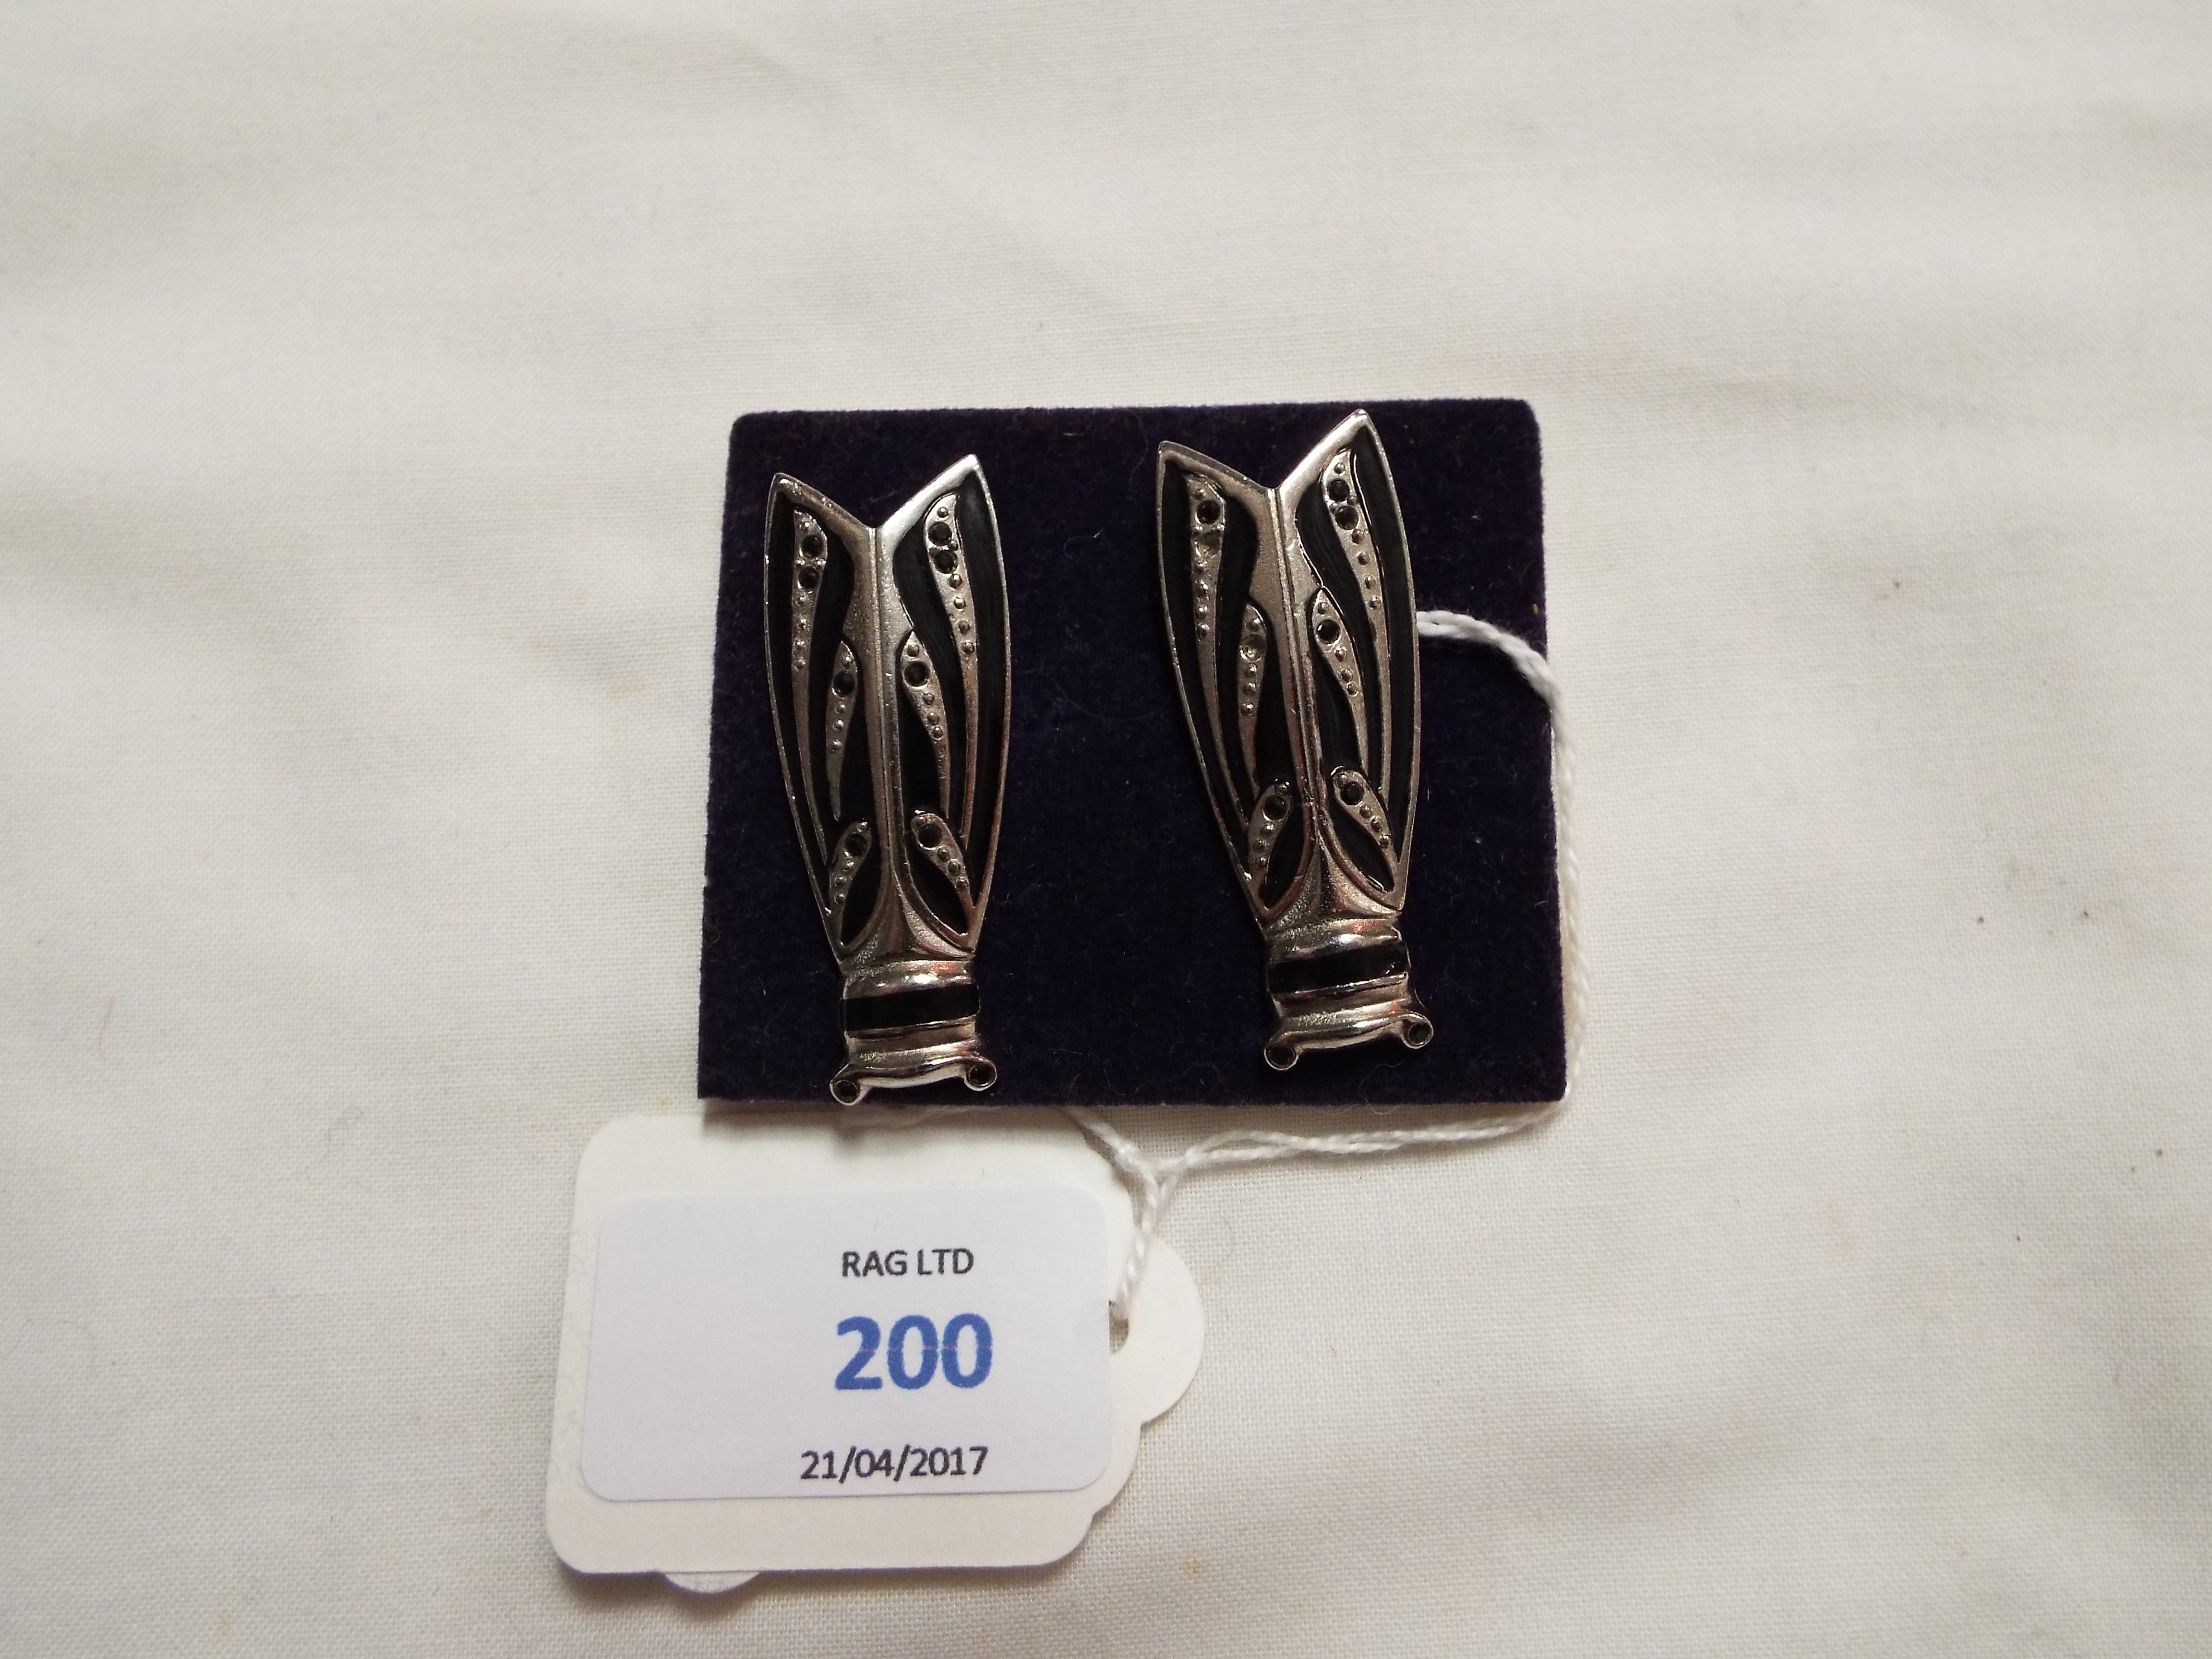 A pair of Butler & Wilson white metal and black painted earrings in the form of bees